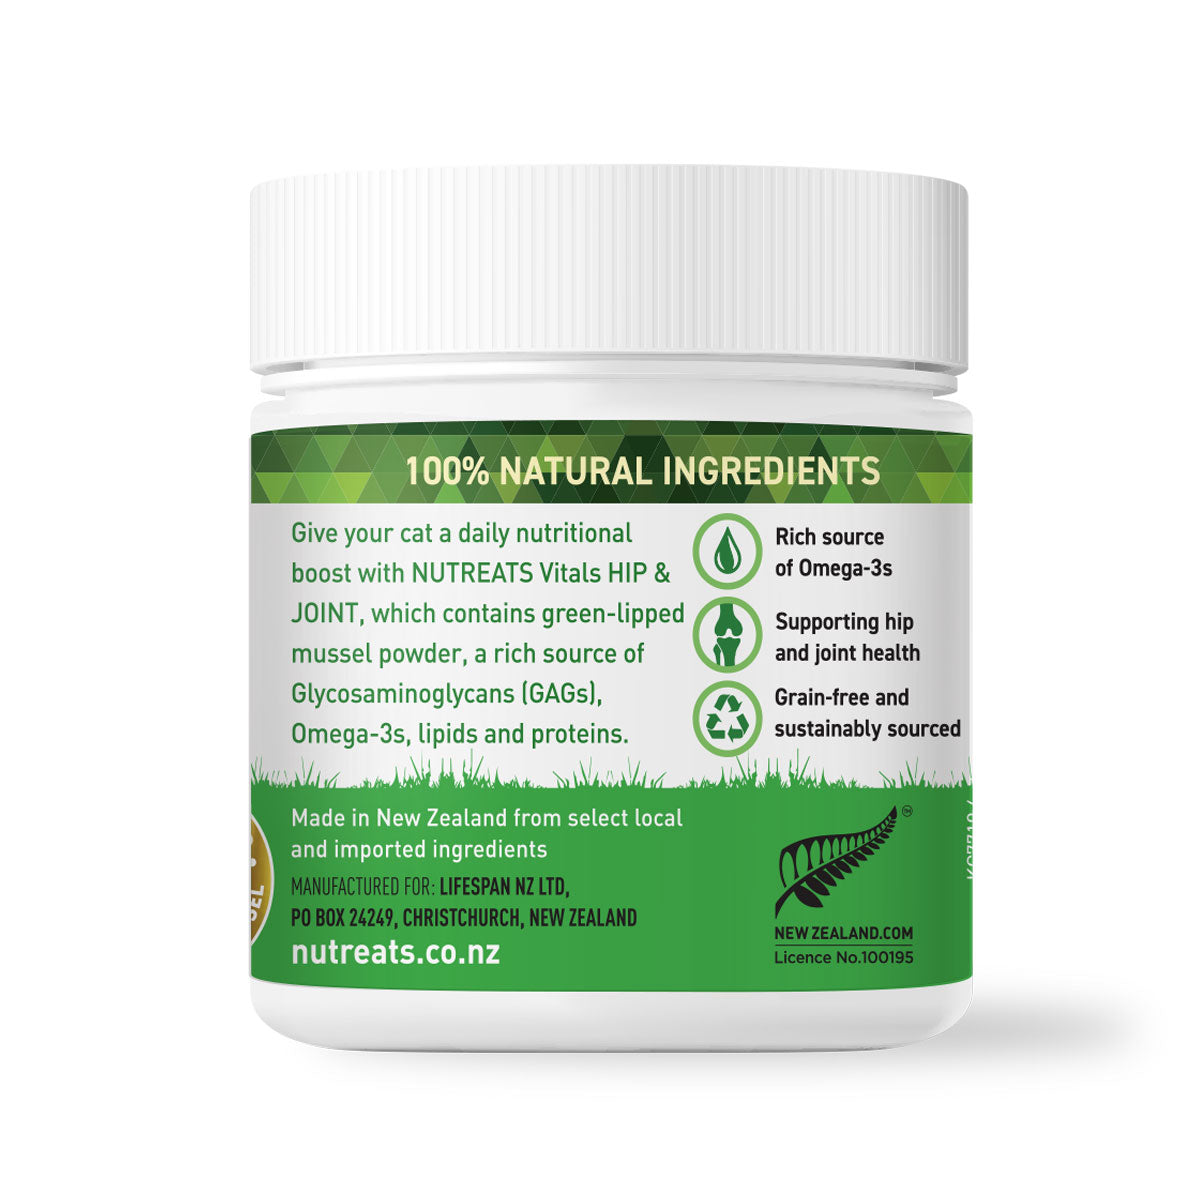 100% natural hip and joint supplement for cats supporting healthy hips and joints with a rich source of Omega3. Supports natural healthy joints in cats. Grain free and sustainably sourced. Contains green-lipped mussel powder.